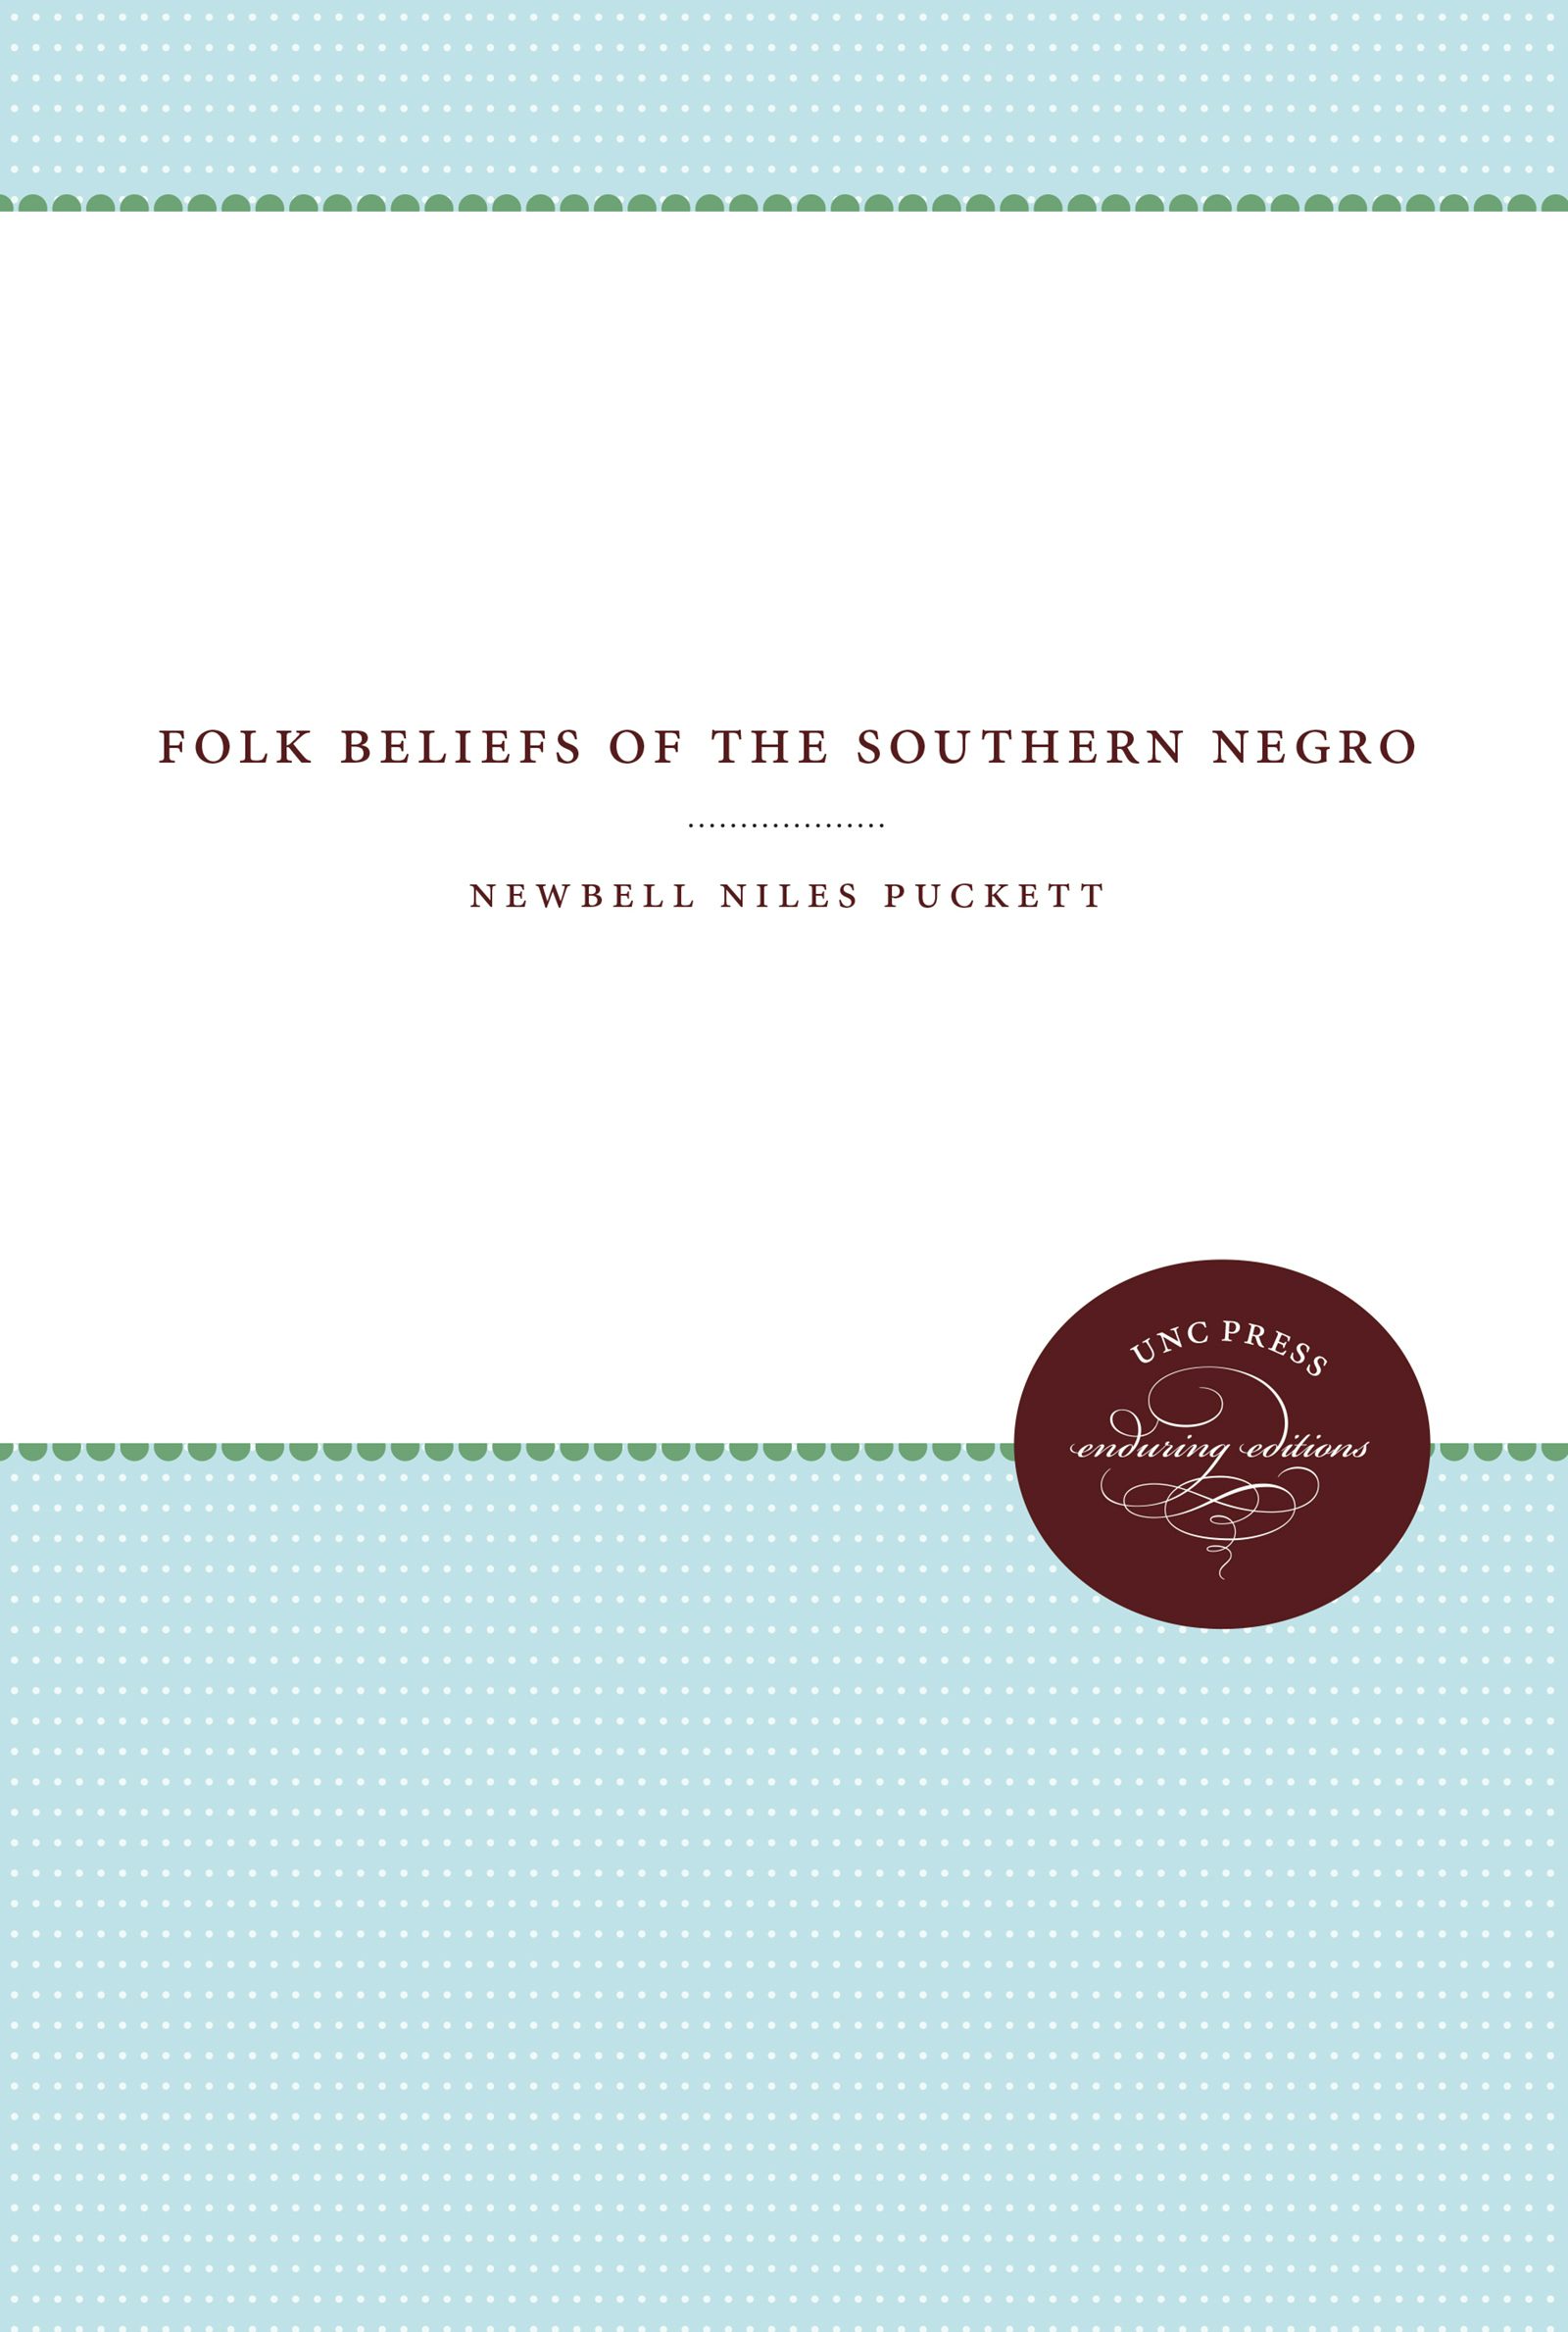 Popular Beliefs and Superstitions by Newbell Niles Puckett